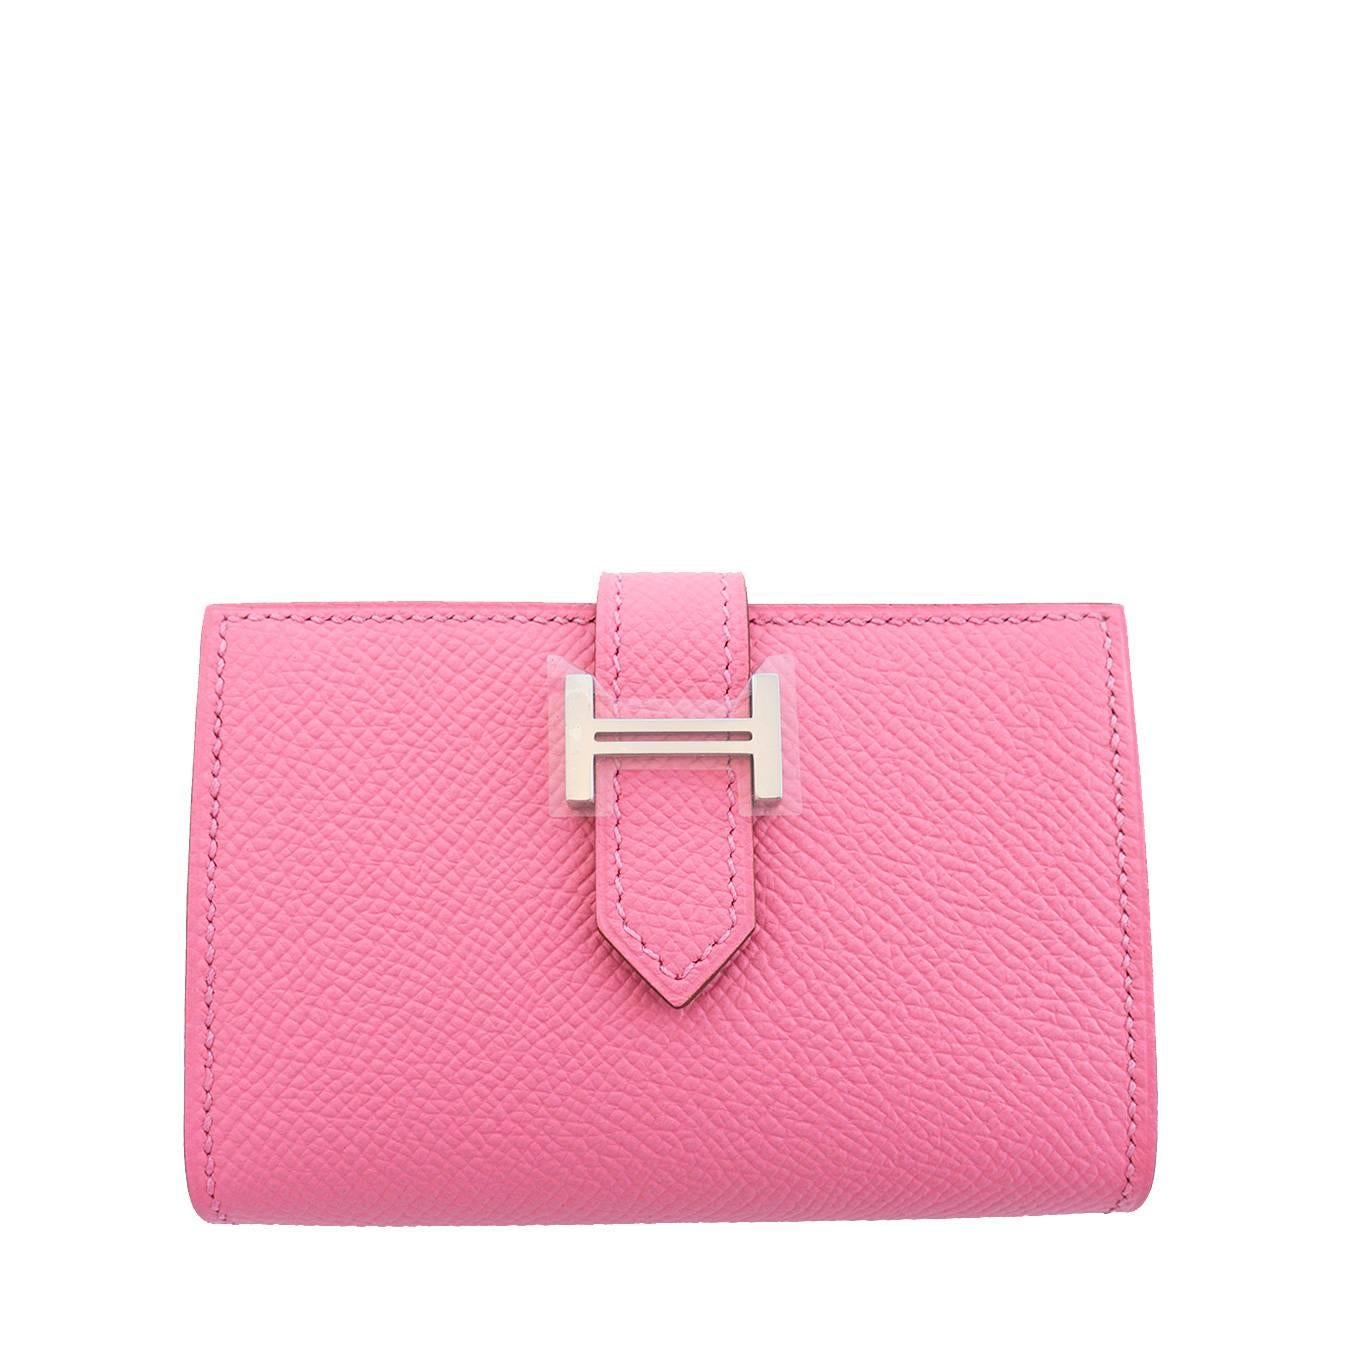 Hermes Rose Confetti Pink Bearn Compact Card-Holder Wallet Case Perfect Gift!